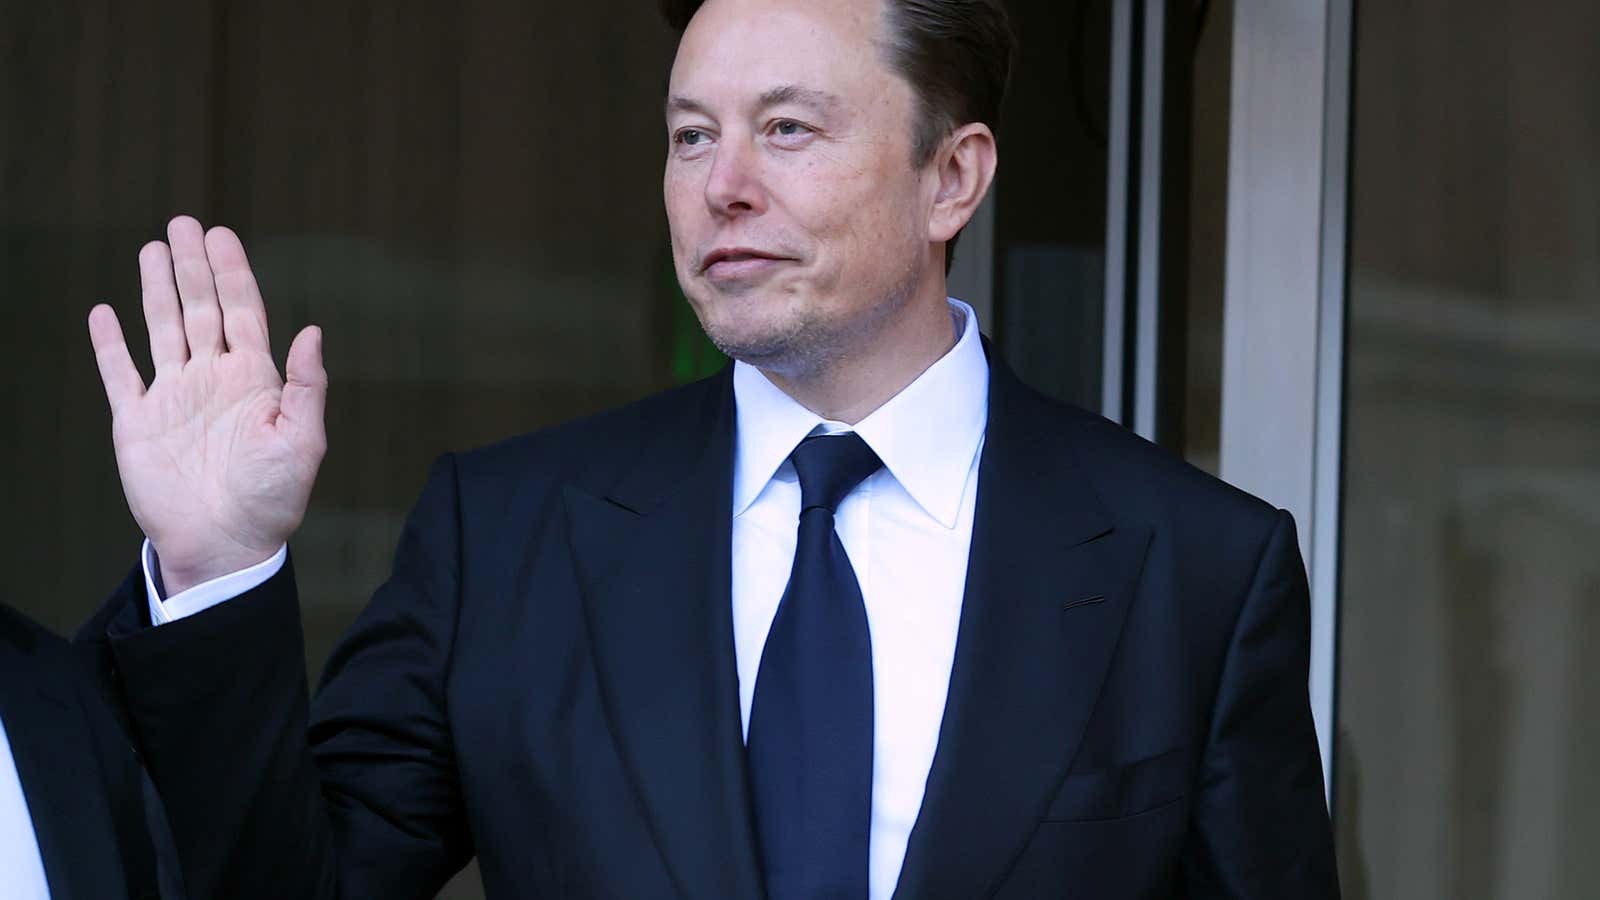 Elon Musk took over Twitter in October, but has struggled to sell subscriptions to the website.